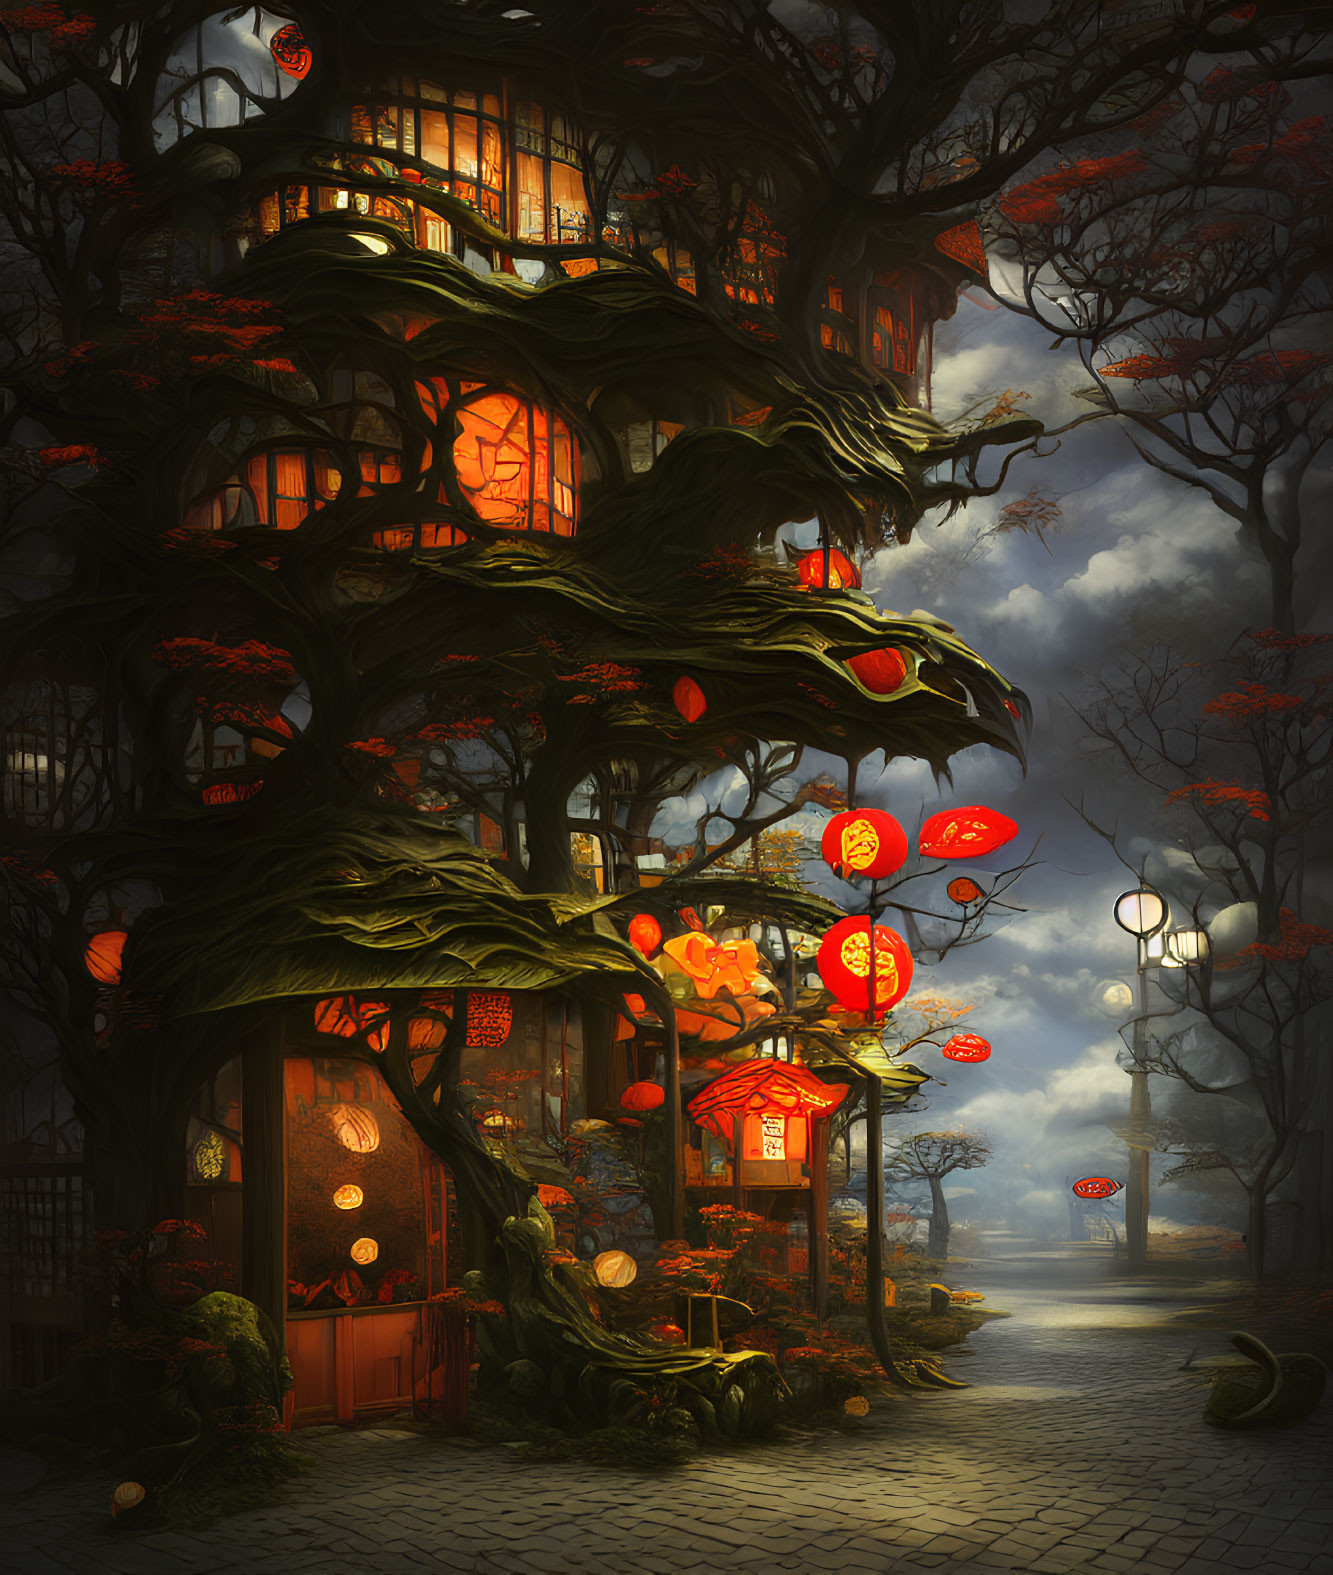 Enchanting multi-level treehouse with warm glowing windows and red lanterns in mystical, foggy